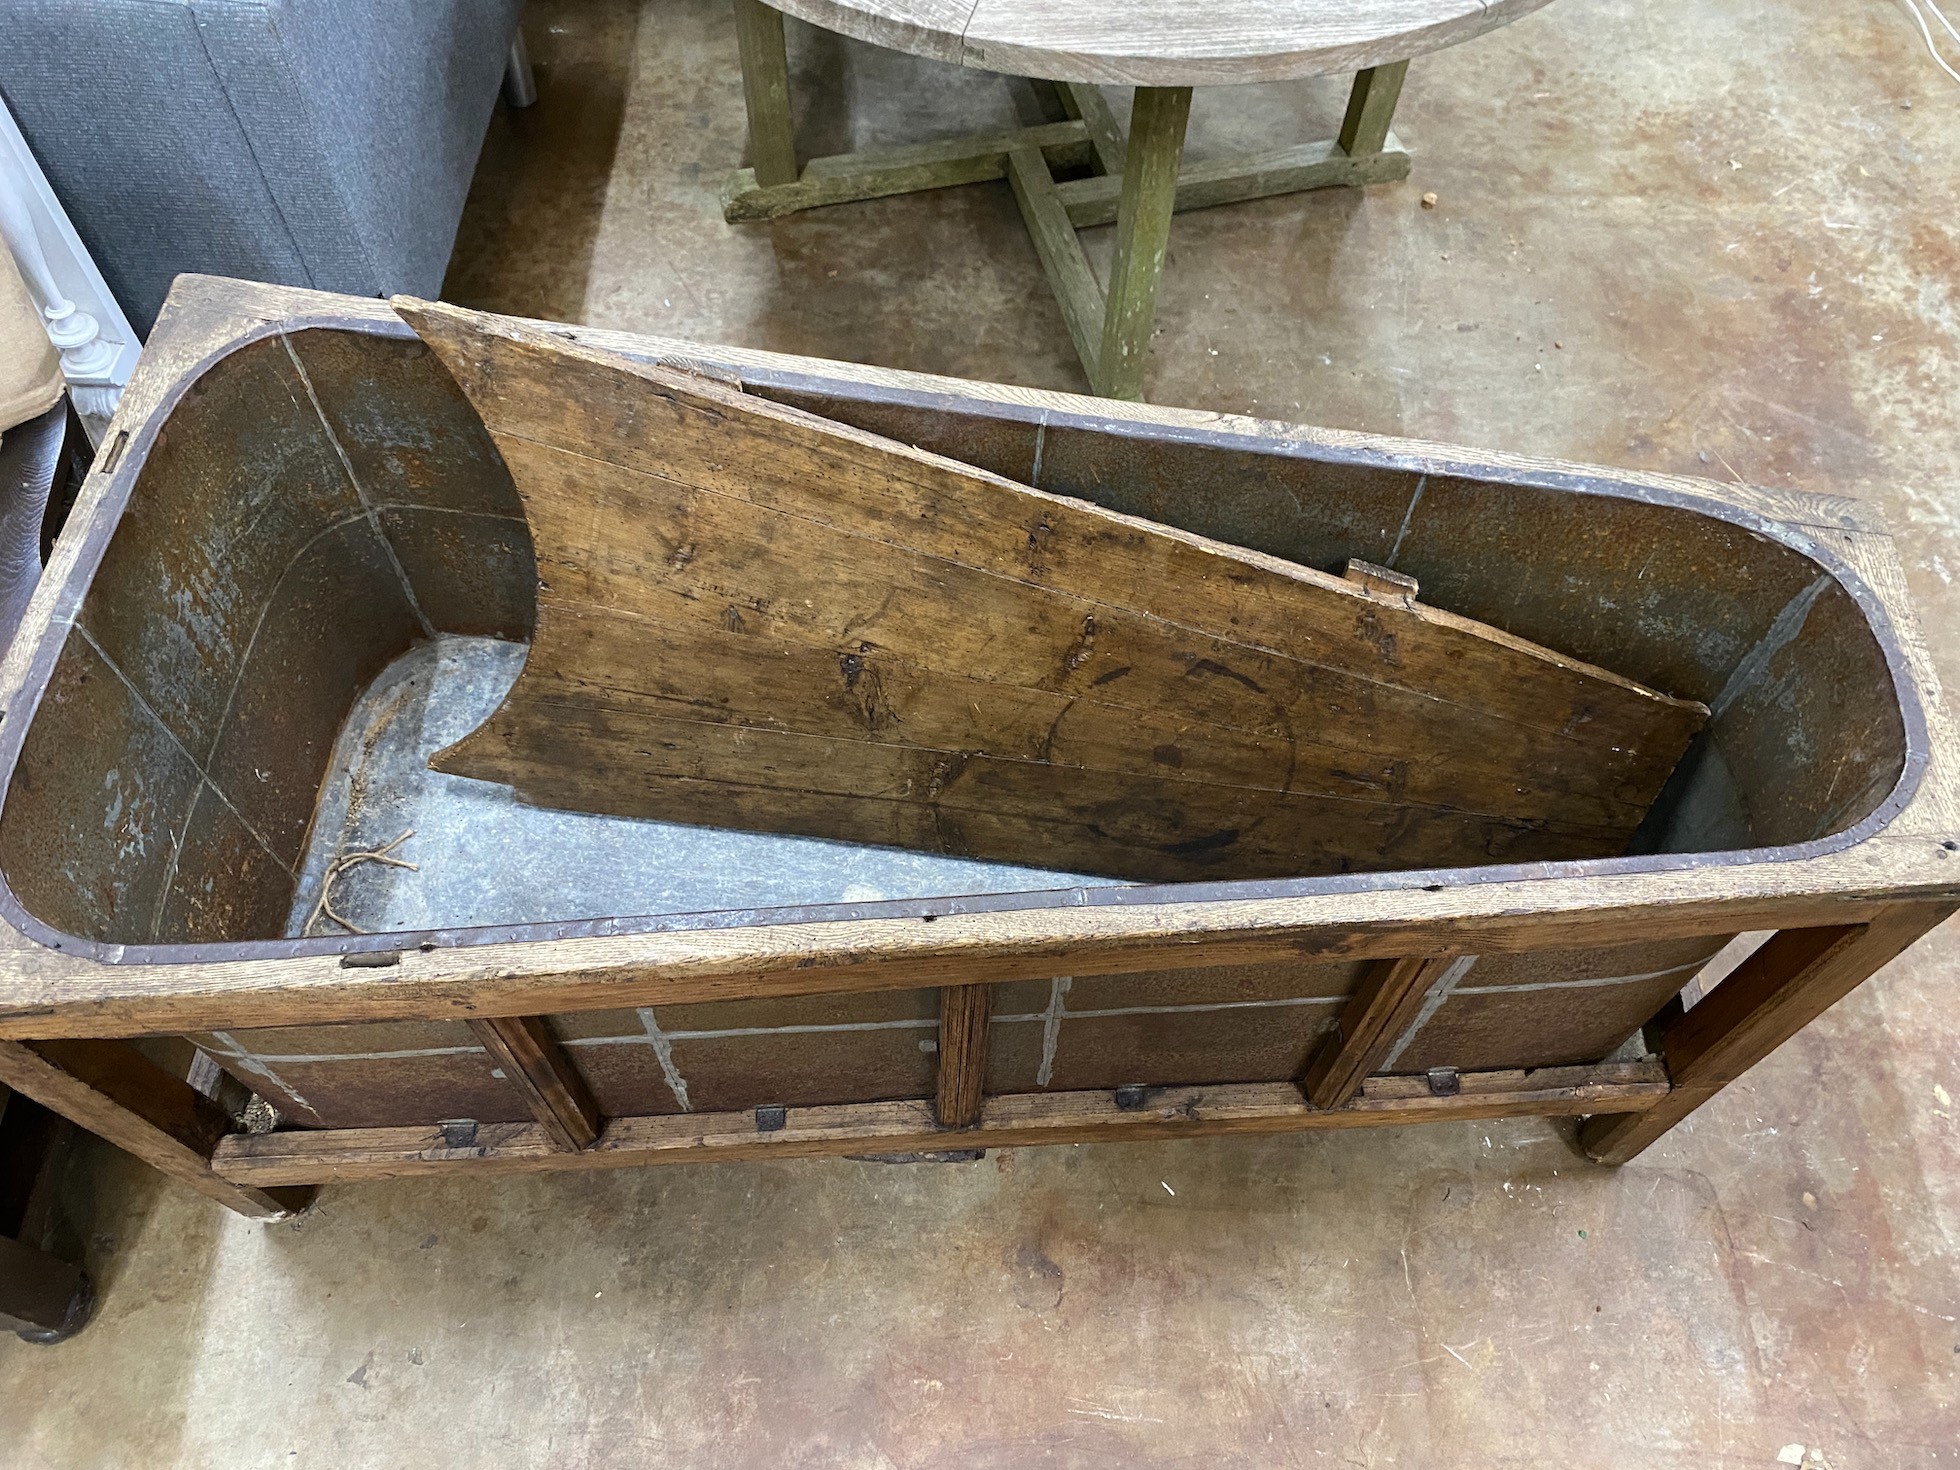 A 19th century French oak bath with zinc liner and cover, length 142cm, depth 65cm, height 64cm *Please note the sale commences at 9am.